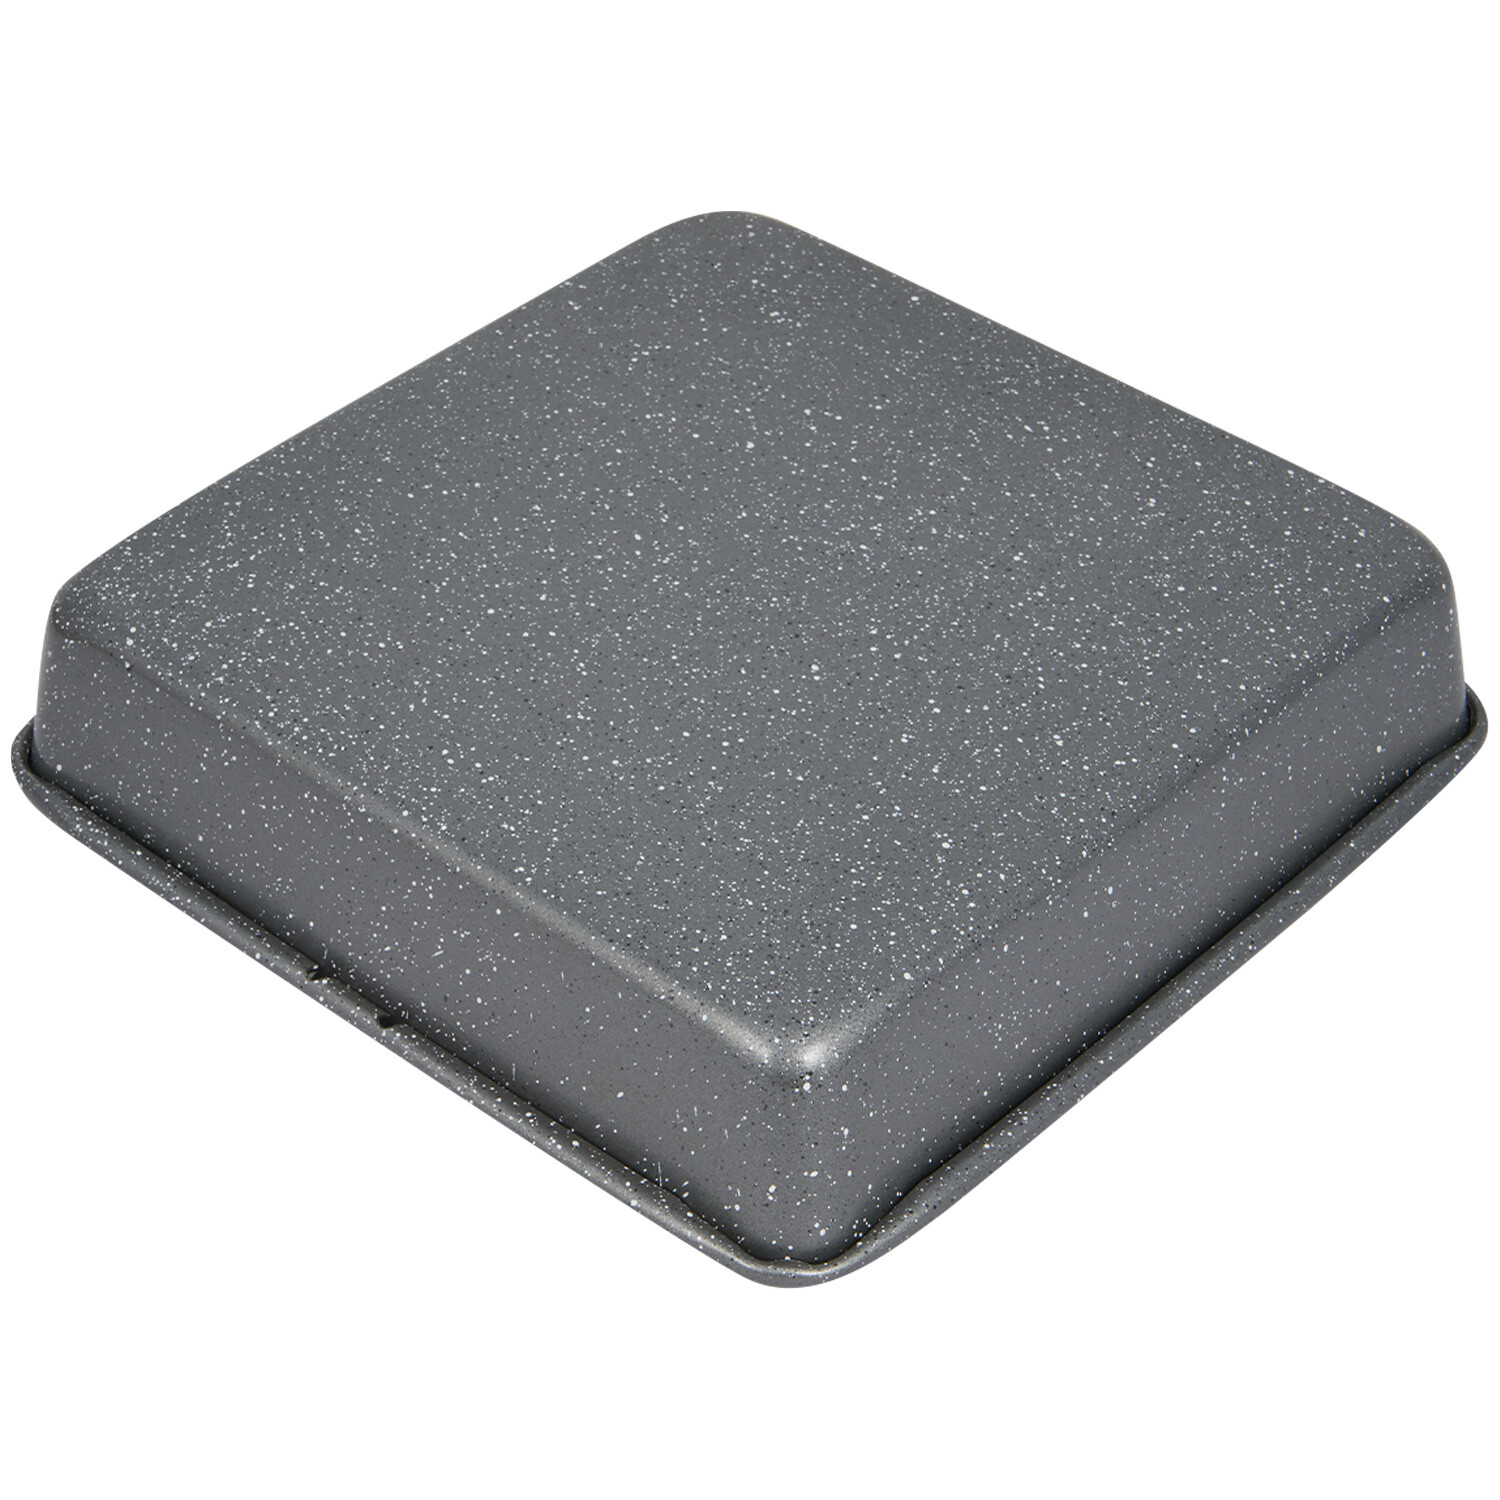 Marble Collection Large Square Cake Pan - Grey Image 5